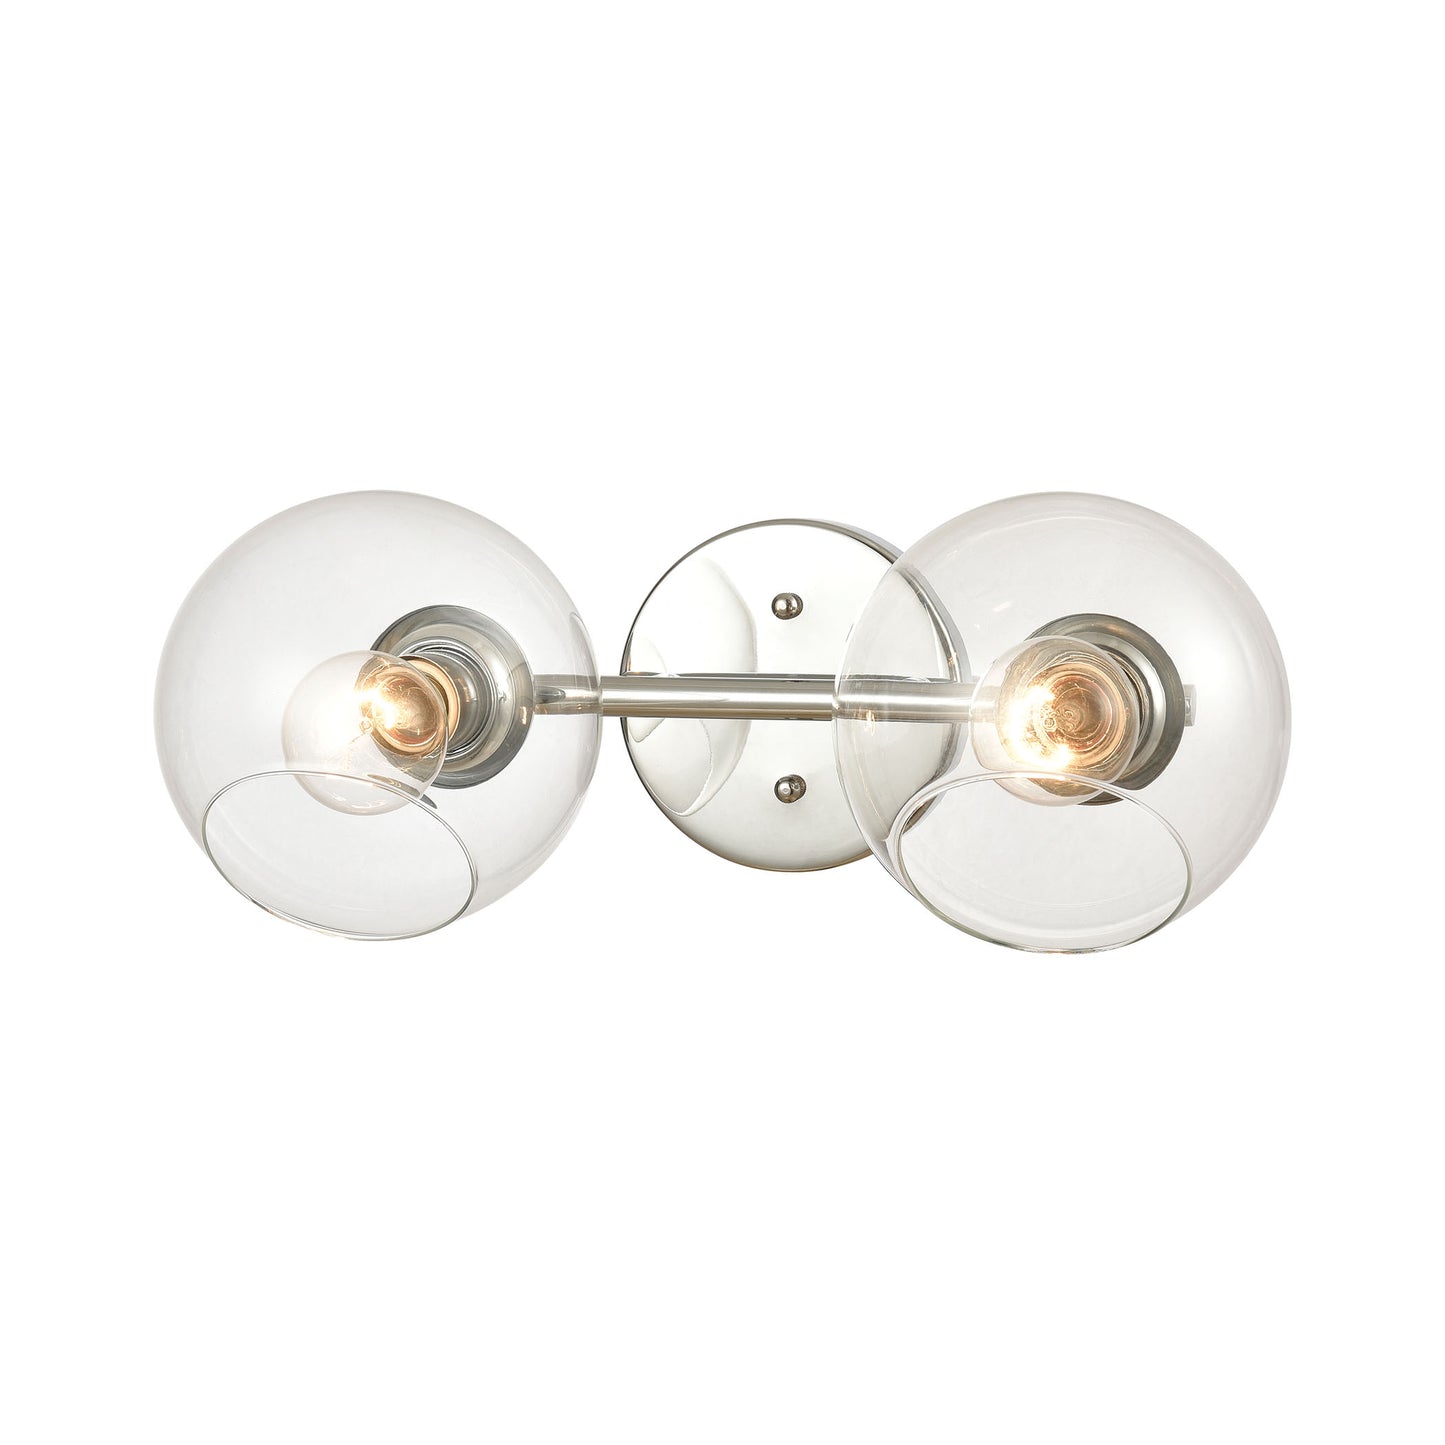 ELK Lighting 18374/2 - Claro 16" Wide 2-Light Vanity Light in Polished Chrome with Clear Glass